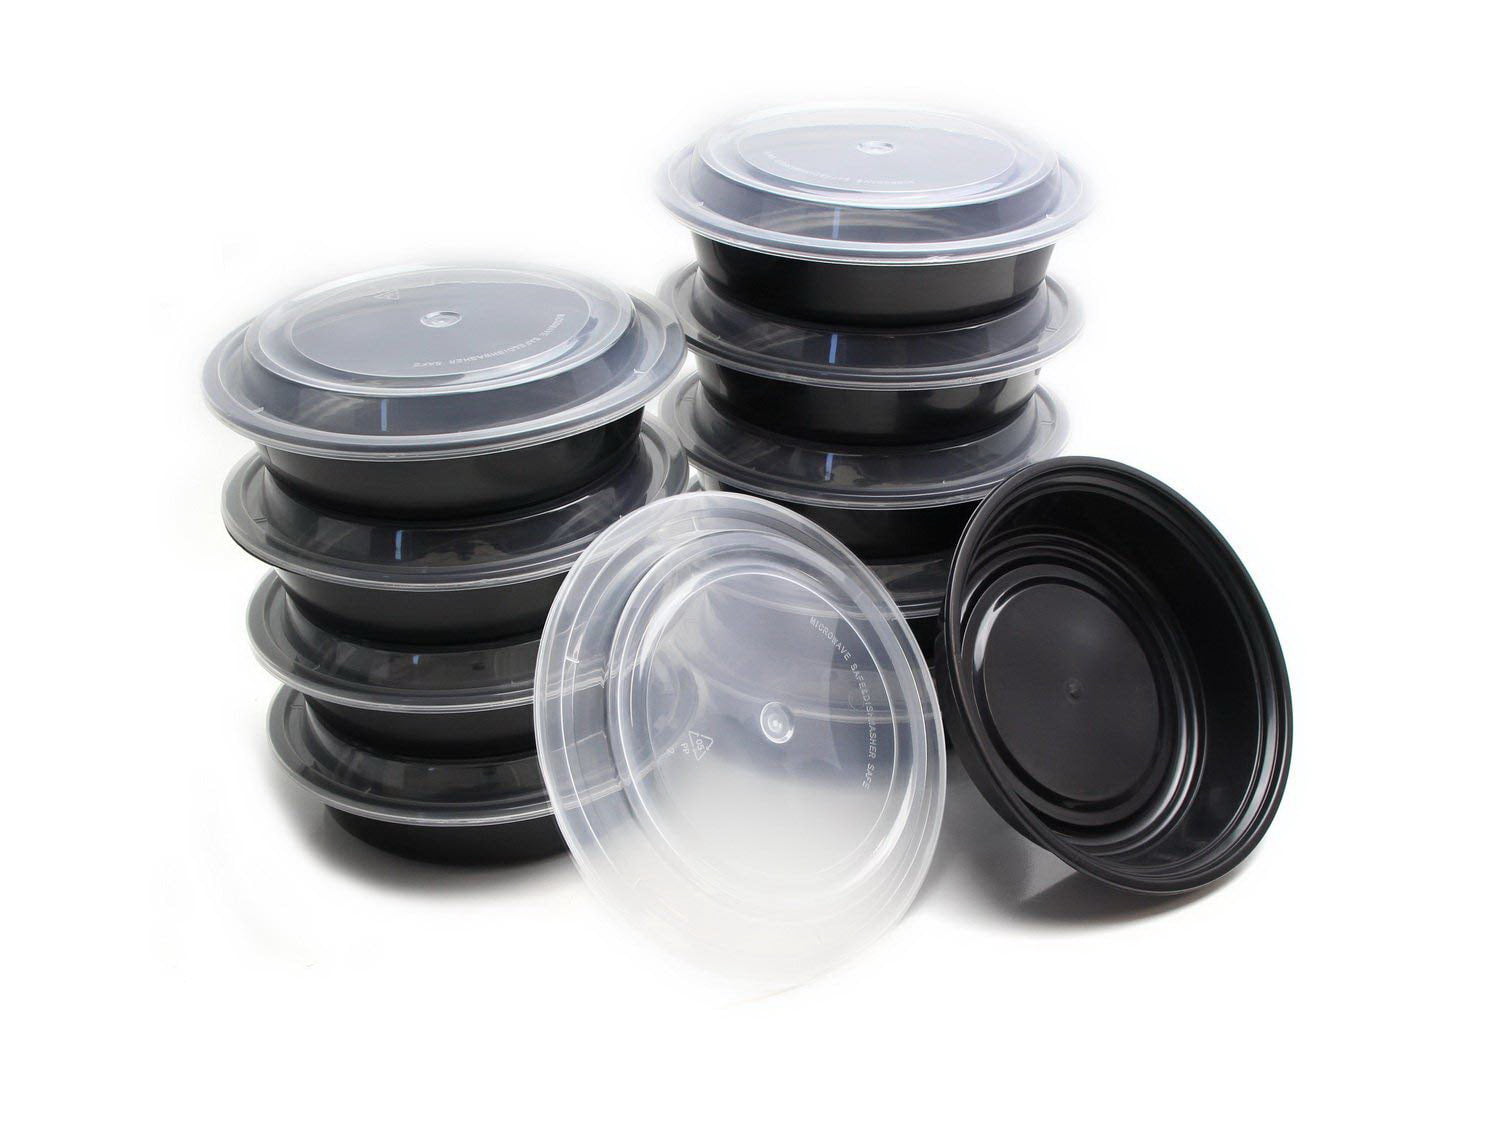 24-oz Microwave Round Container with Lid - 150 Pack (260671)